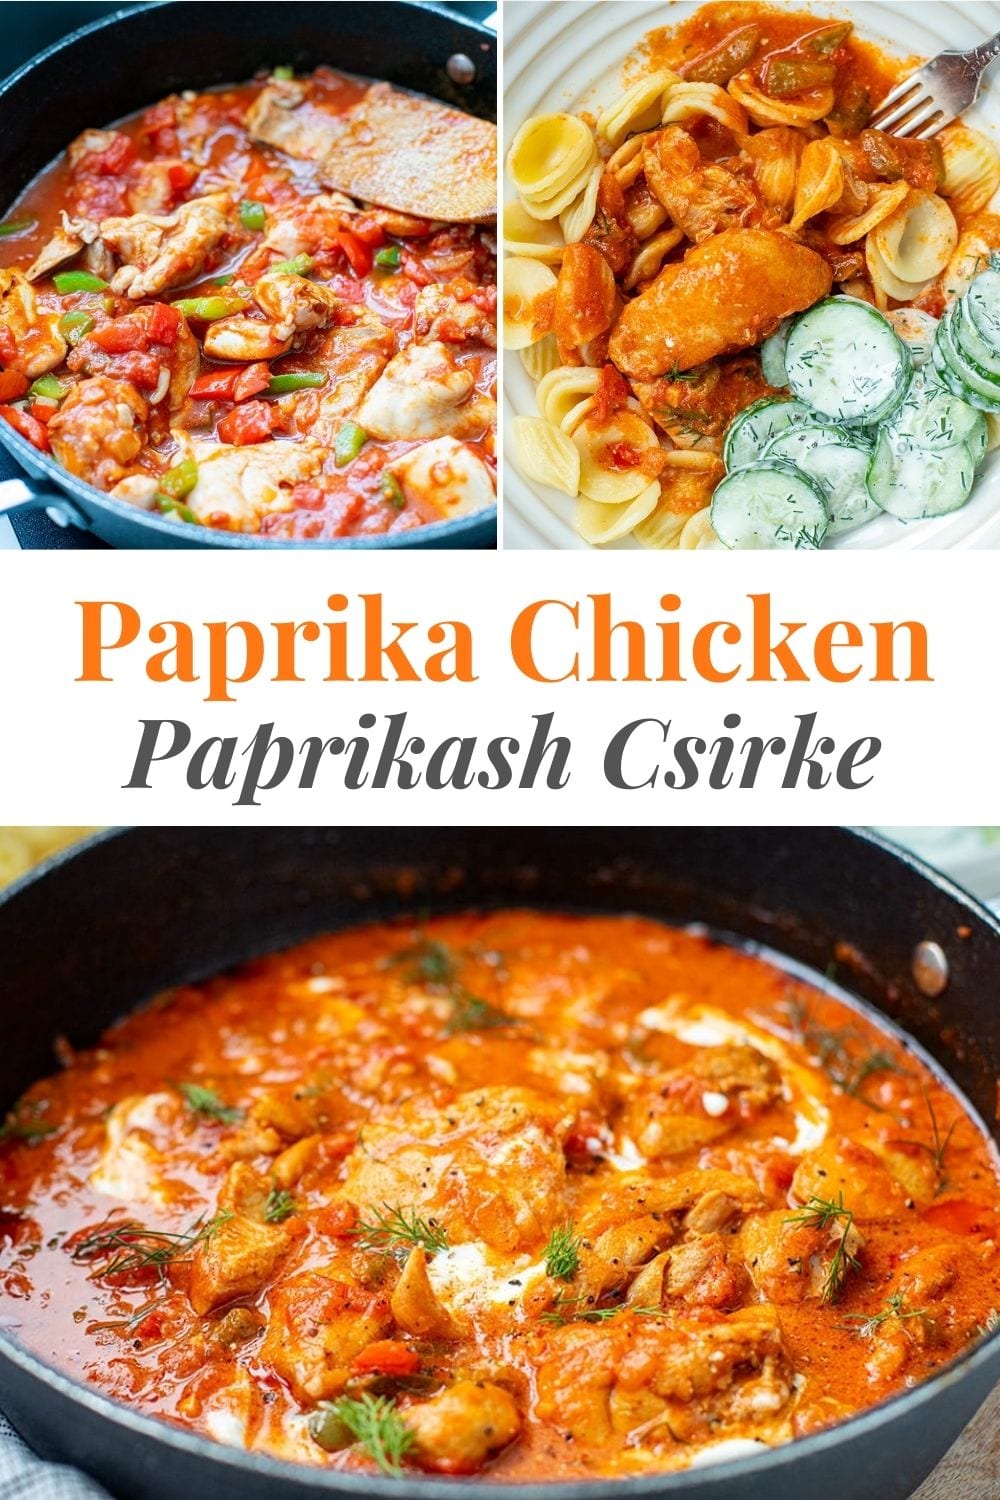 With Hungarian traditions running deep in our family (and this being one of our favourite meals), I cook chicken paprikash, or paprika chicken, A LOT. I’ve adapted the traditional recipe to be more accessible, friendly, and straightforward, something that can be done in under an hour so you can enjoy the warmth and richness of this dish any night of the week!